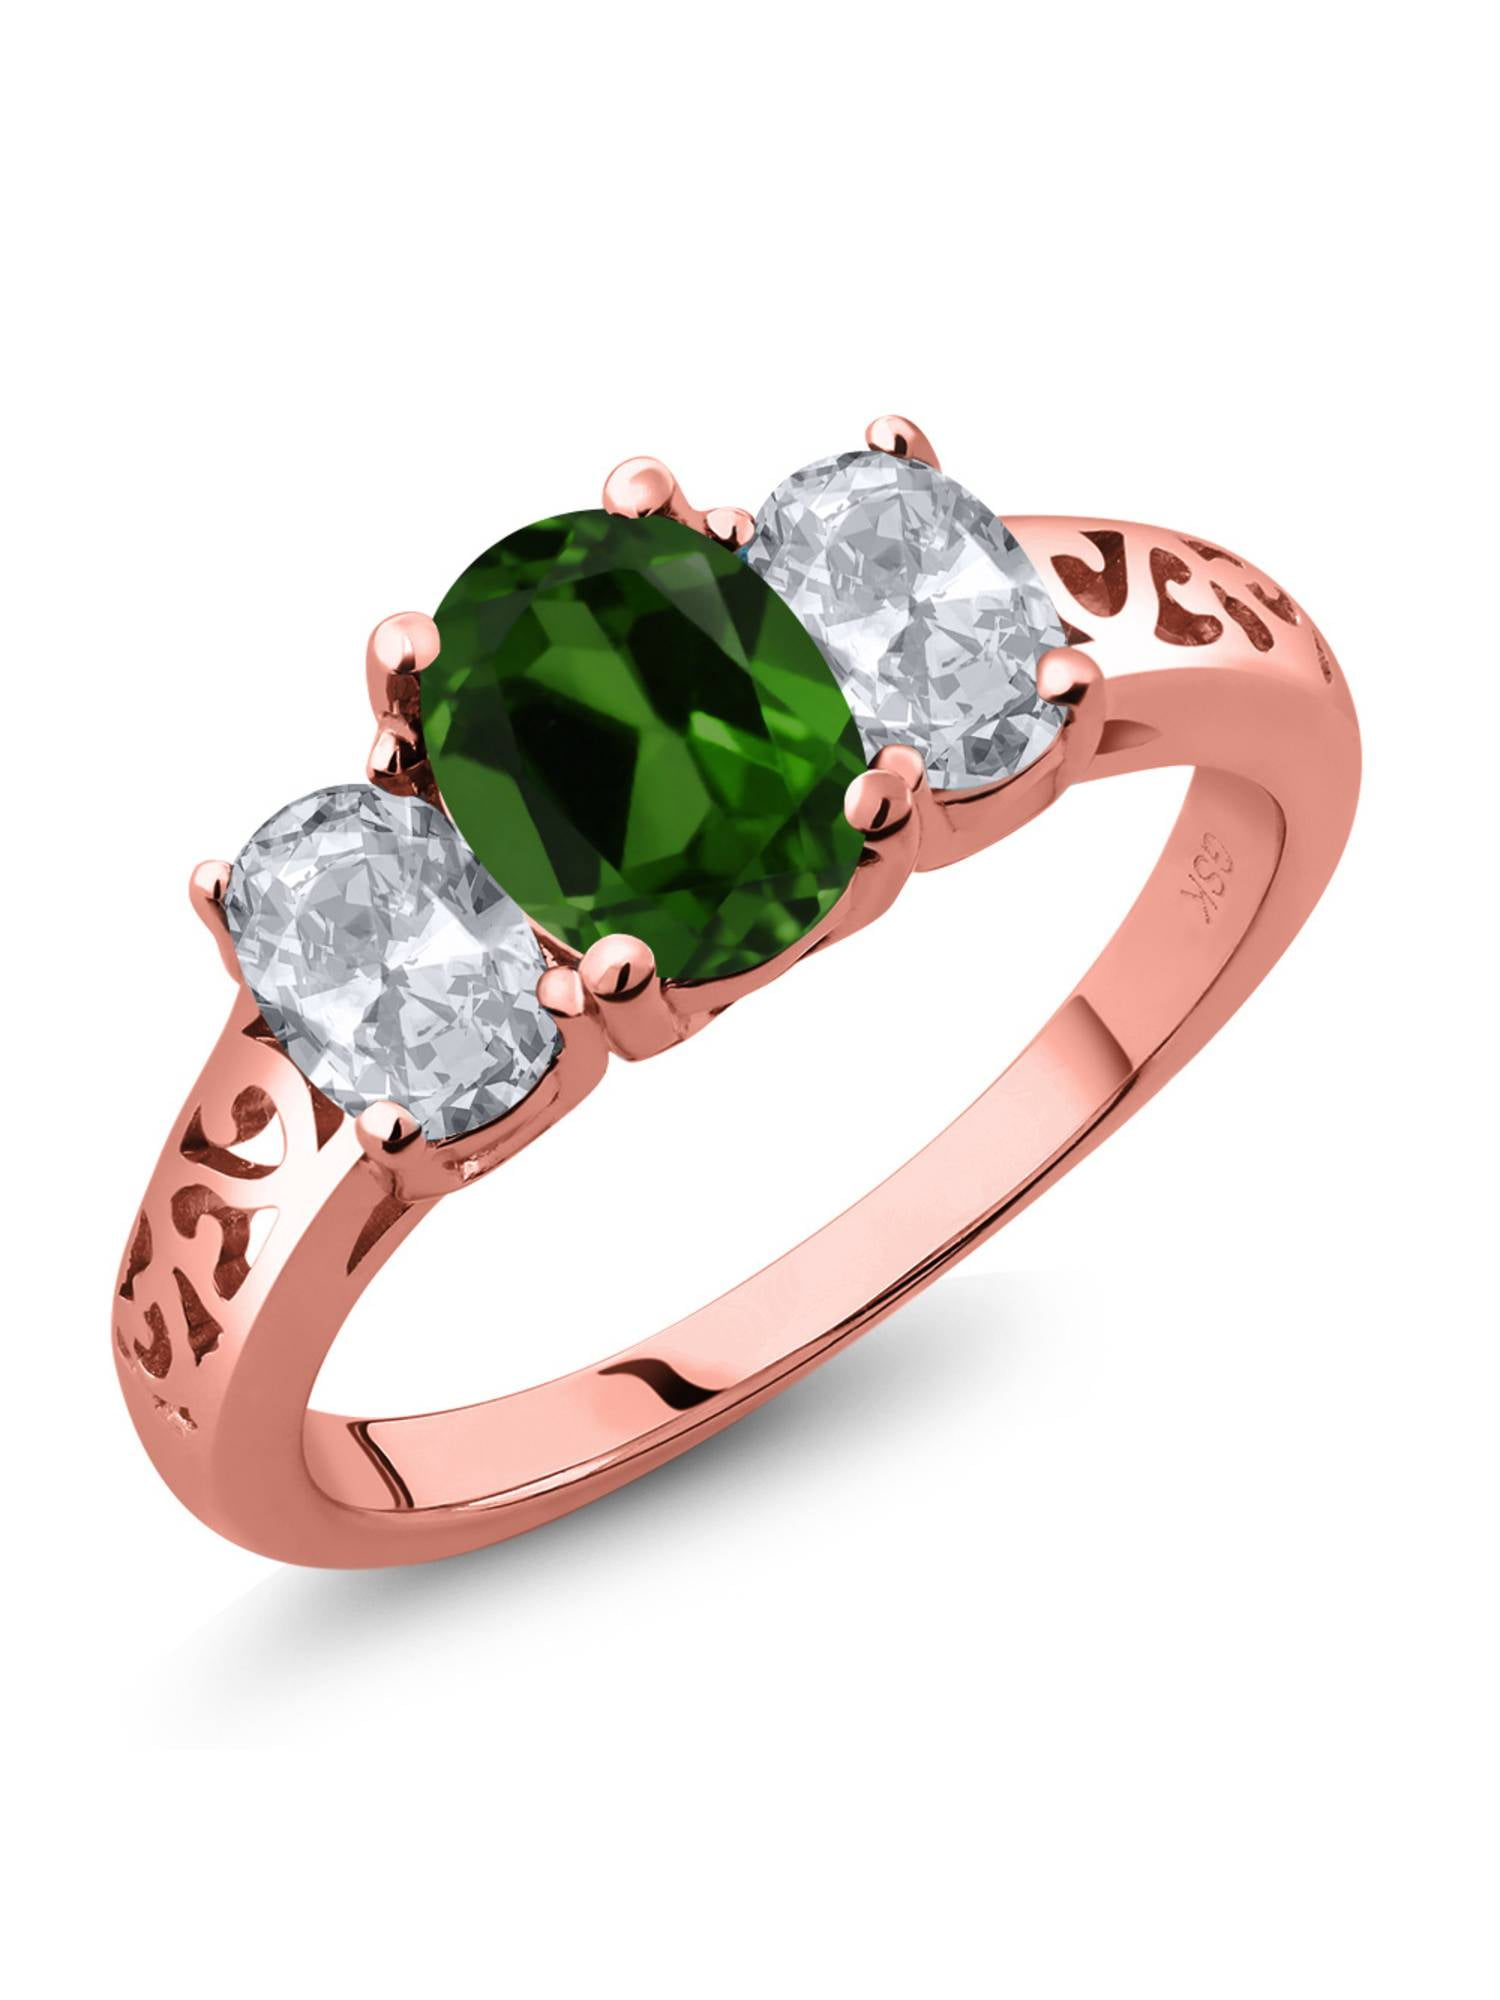 Platinum Over 925 Sterling Silver Chrome Diopside 3 Stone Ring Ct 1.5 